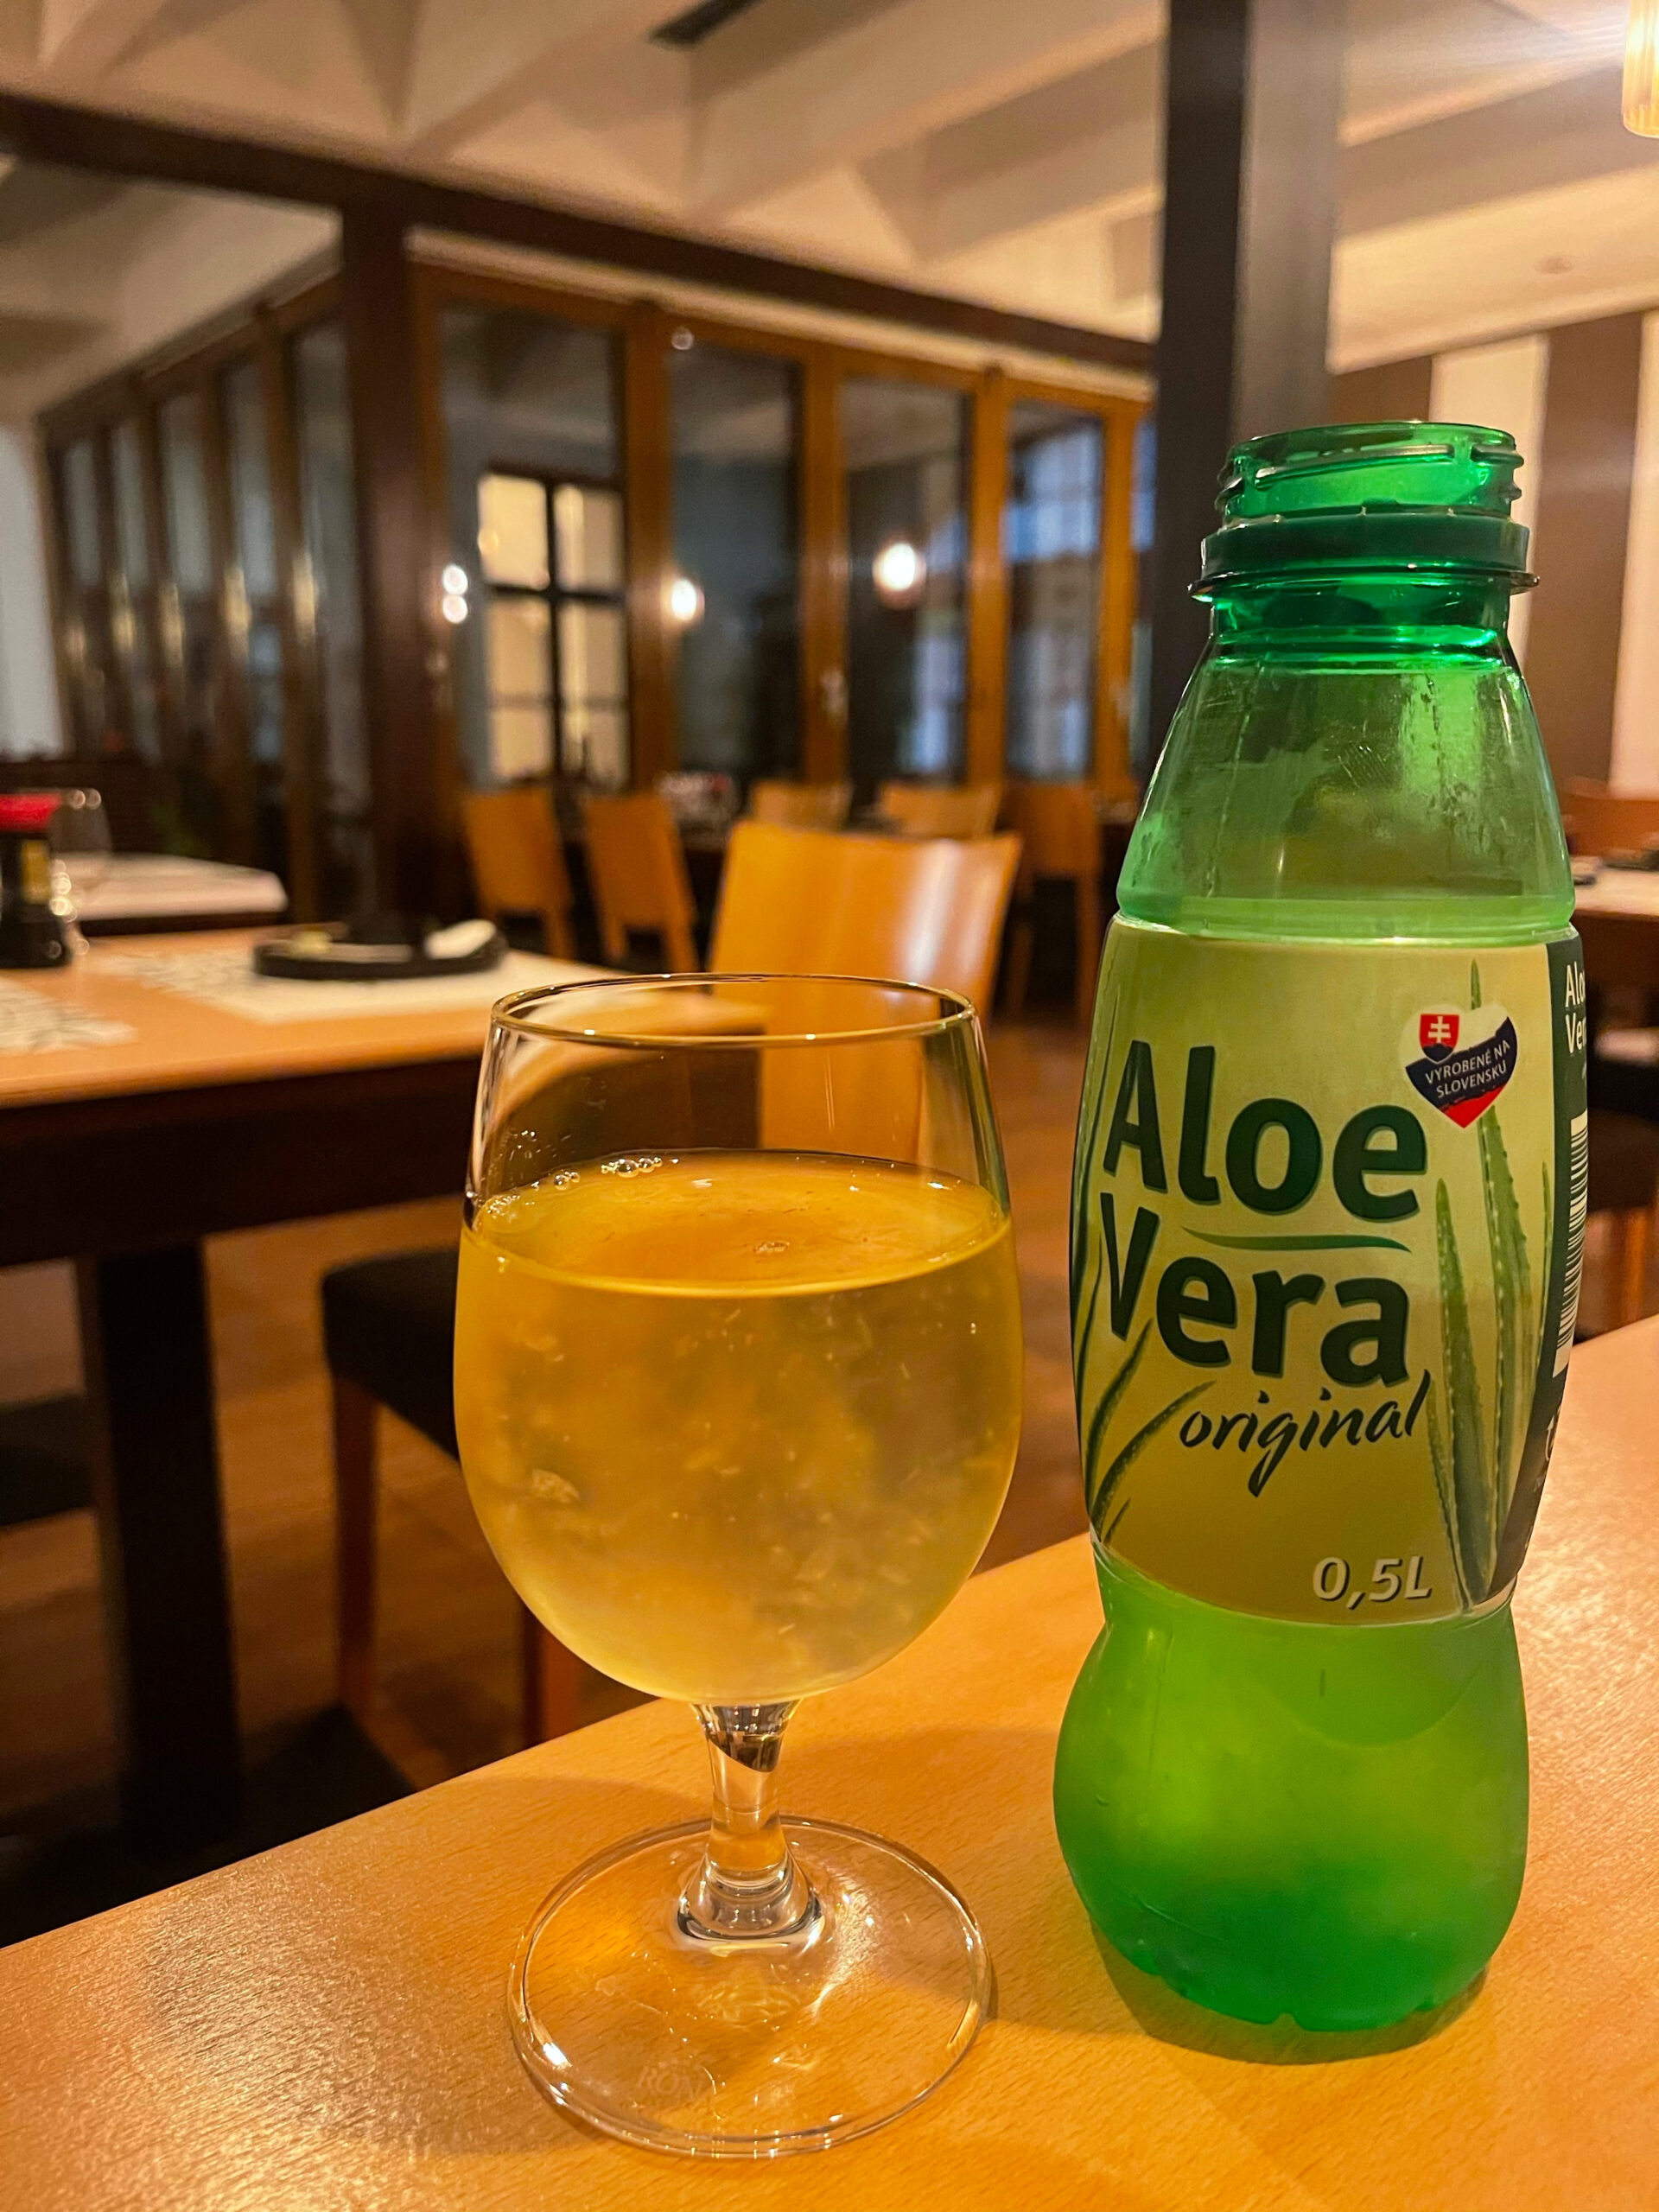 a green bottle that says aloe vera original with the contents poured in the glass looking refreshing